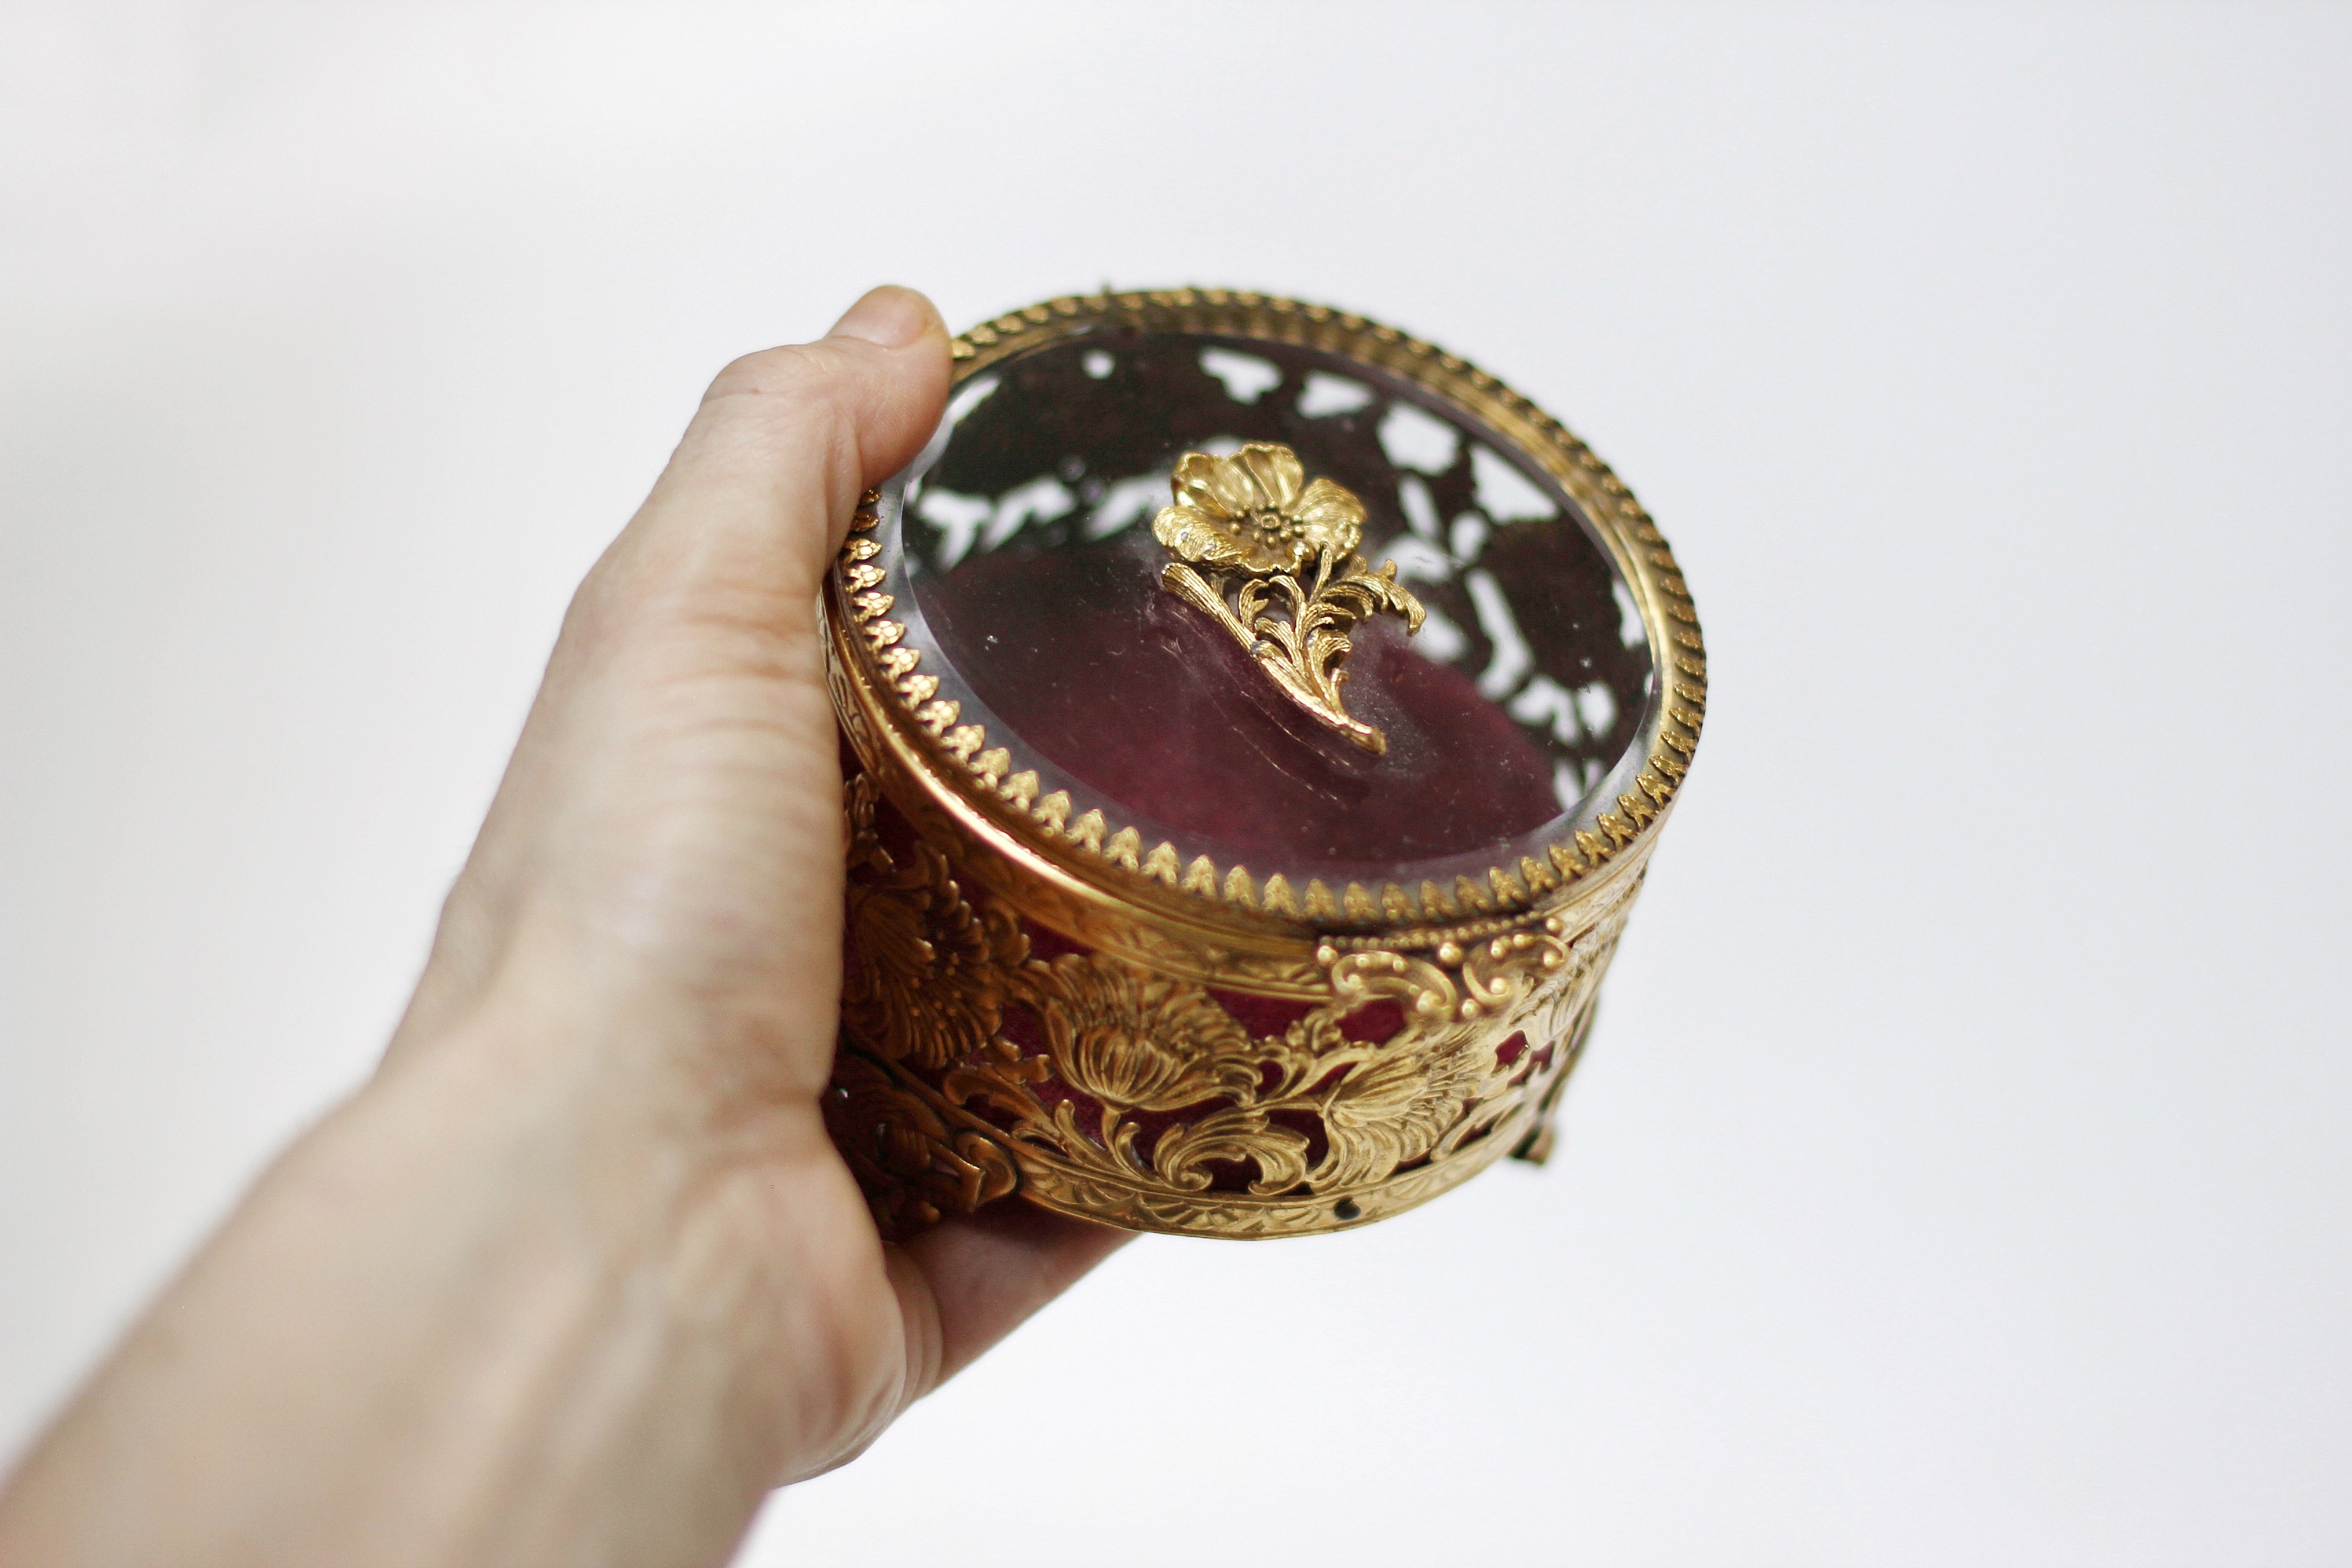 Antique Floral Gold Filigree Jewelry Box